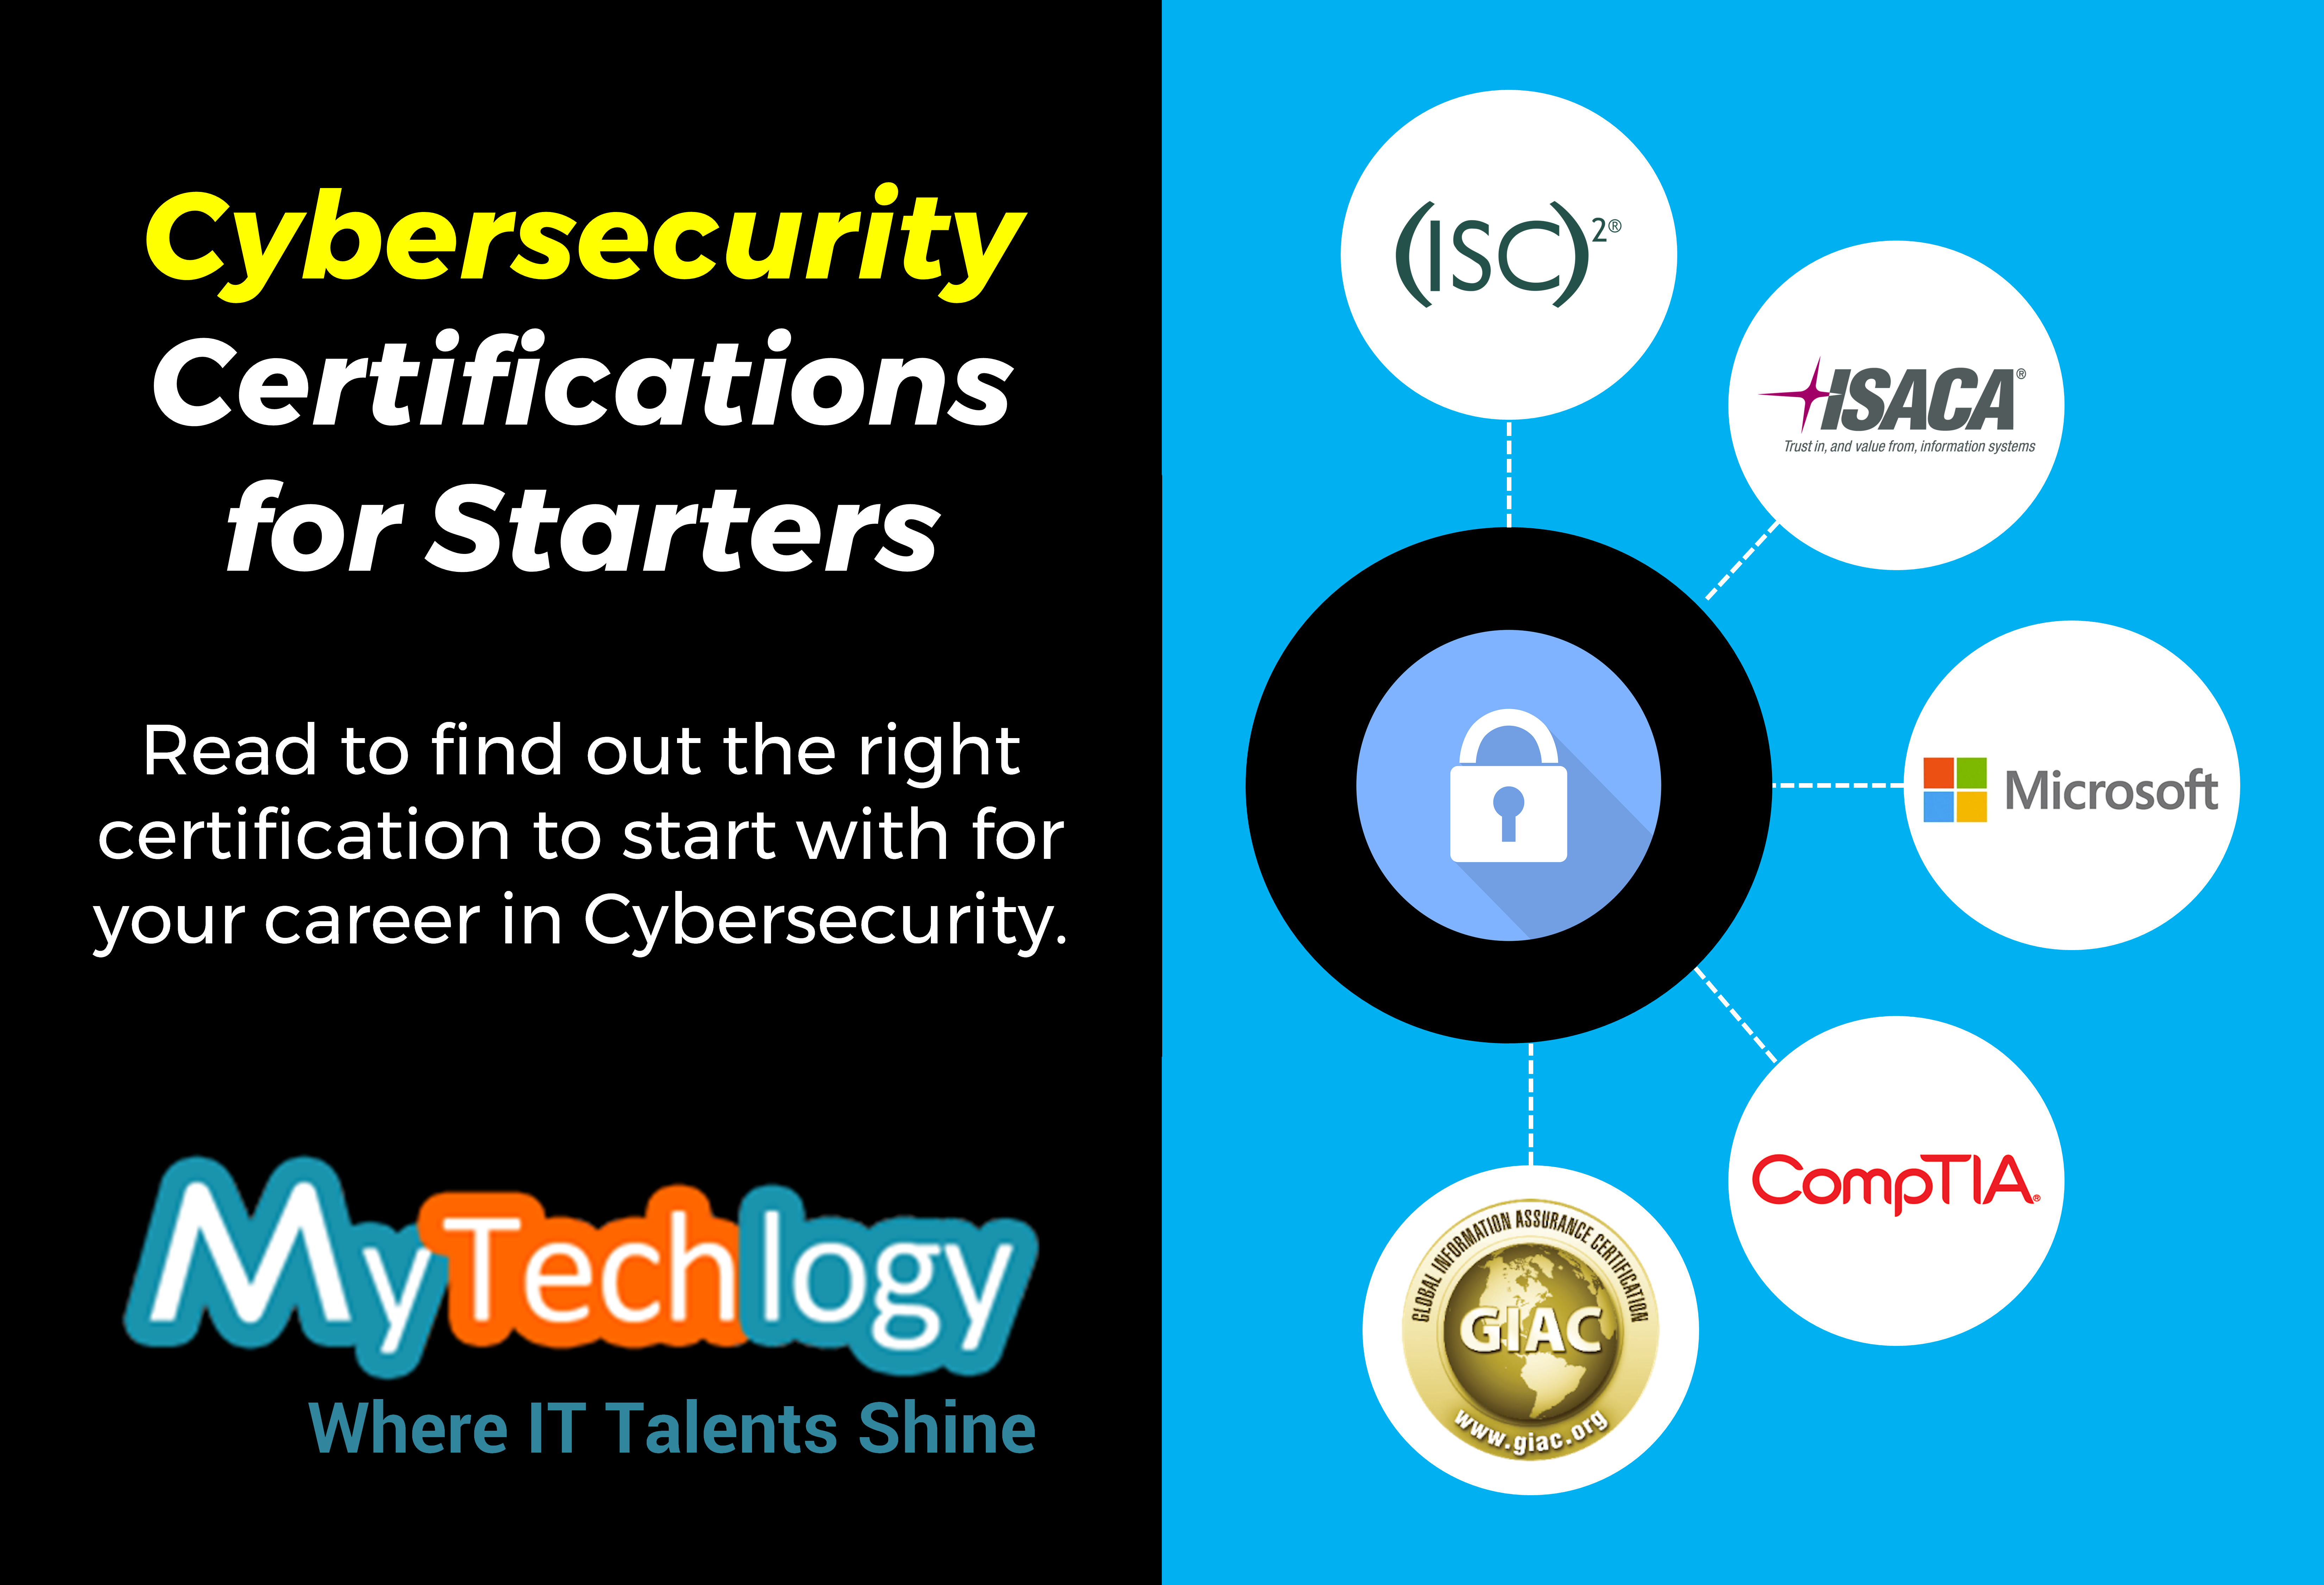 Cybersecurity Certifications for Starters - Image 1